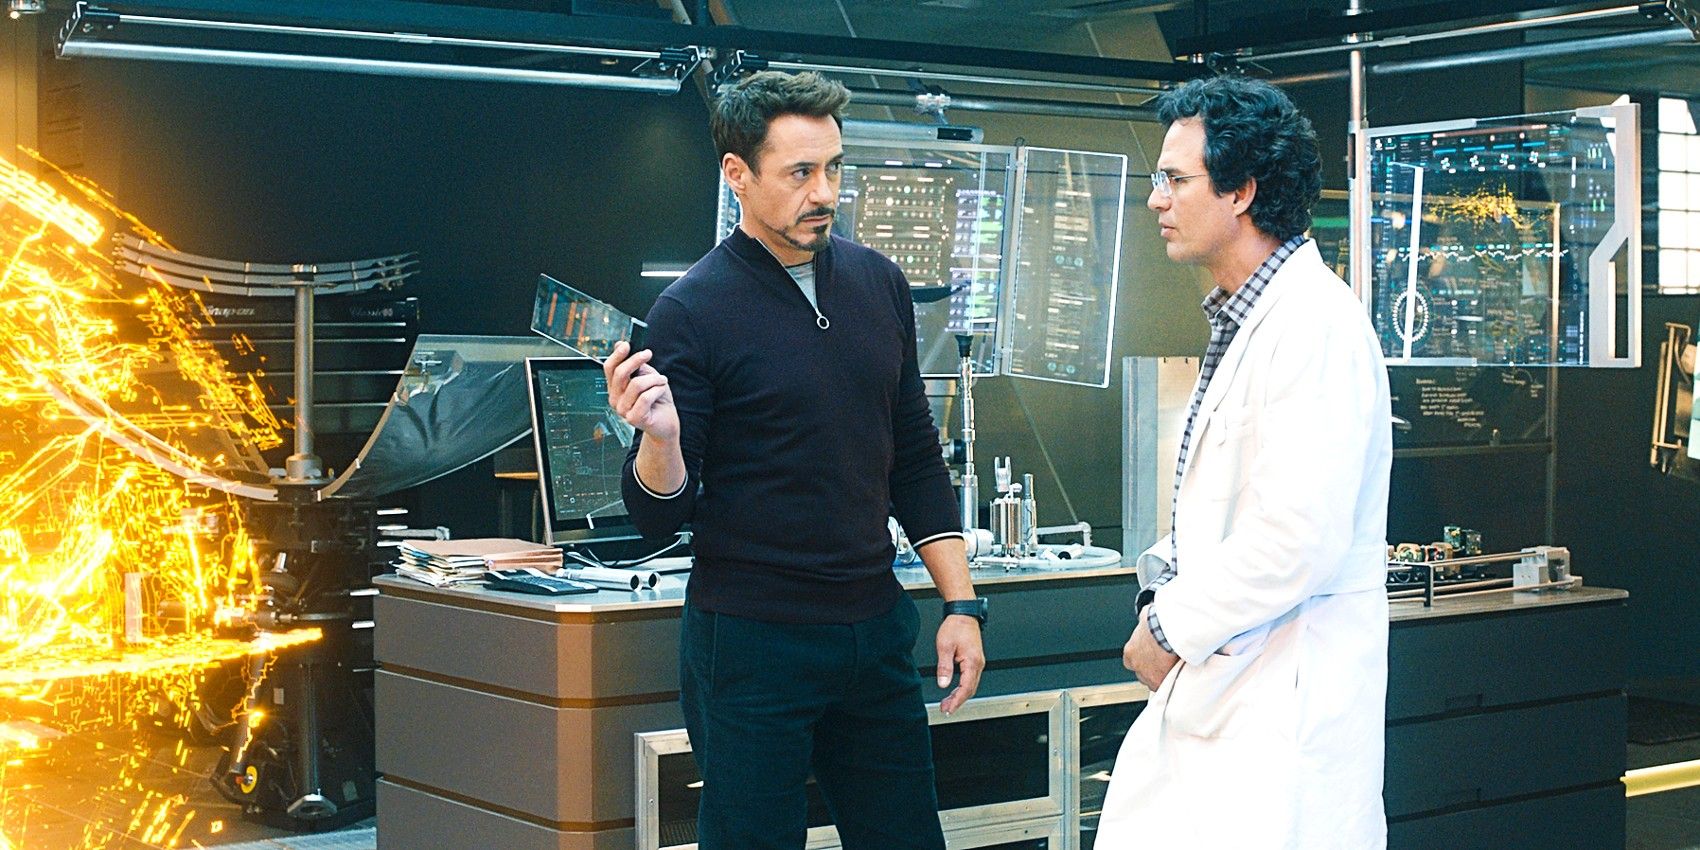 Robert Downey Jr as Tony Stark and Mark Ruffalo as Bruce Banner in science lab in Avengers Age of Ultron